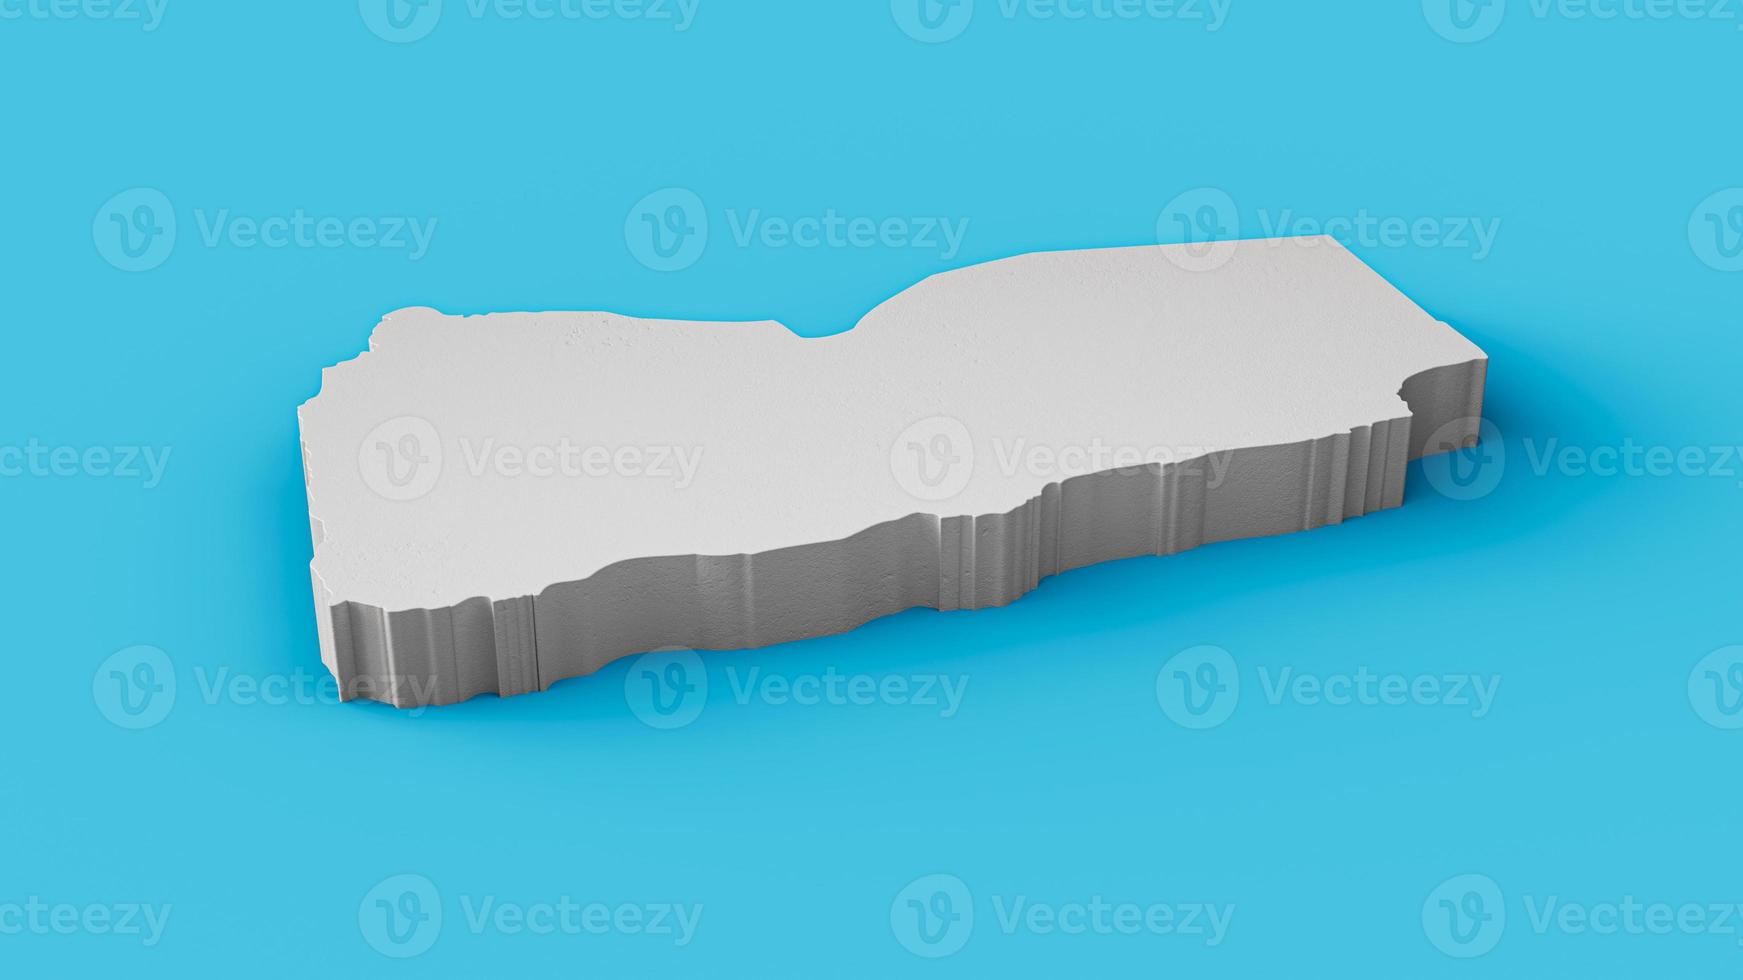 Yemen 3D map Geography Cartography and topology Sea Blue surface 3D illustration photo